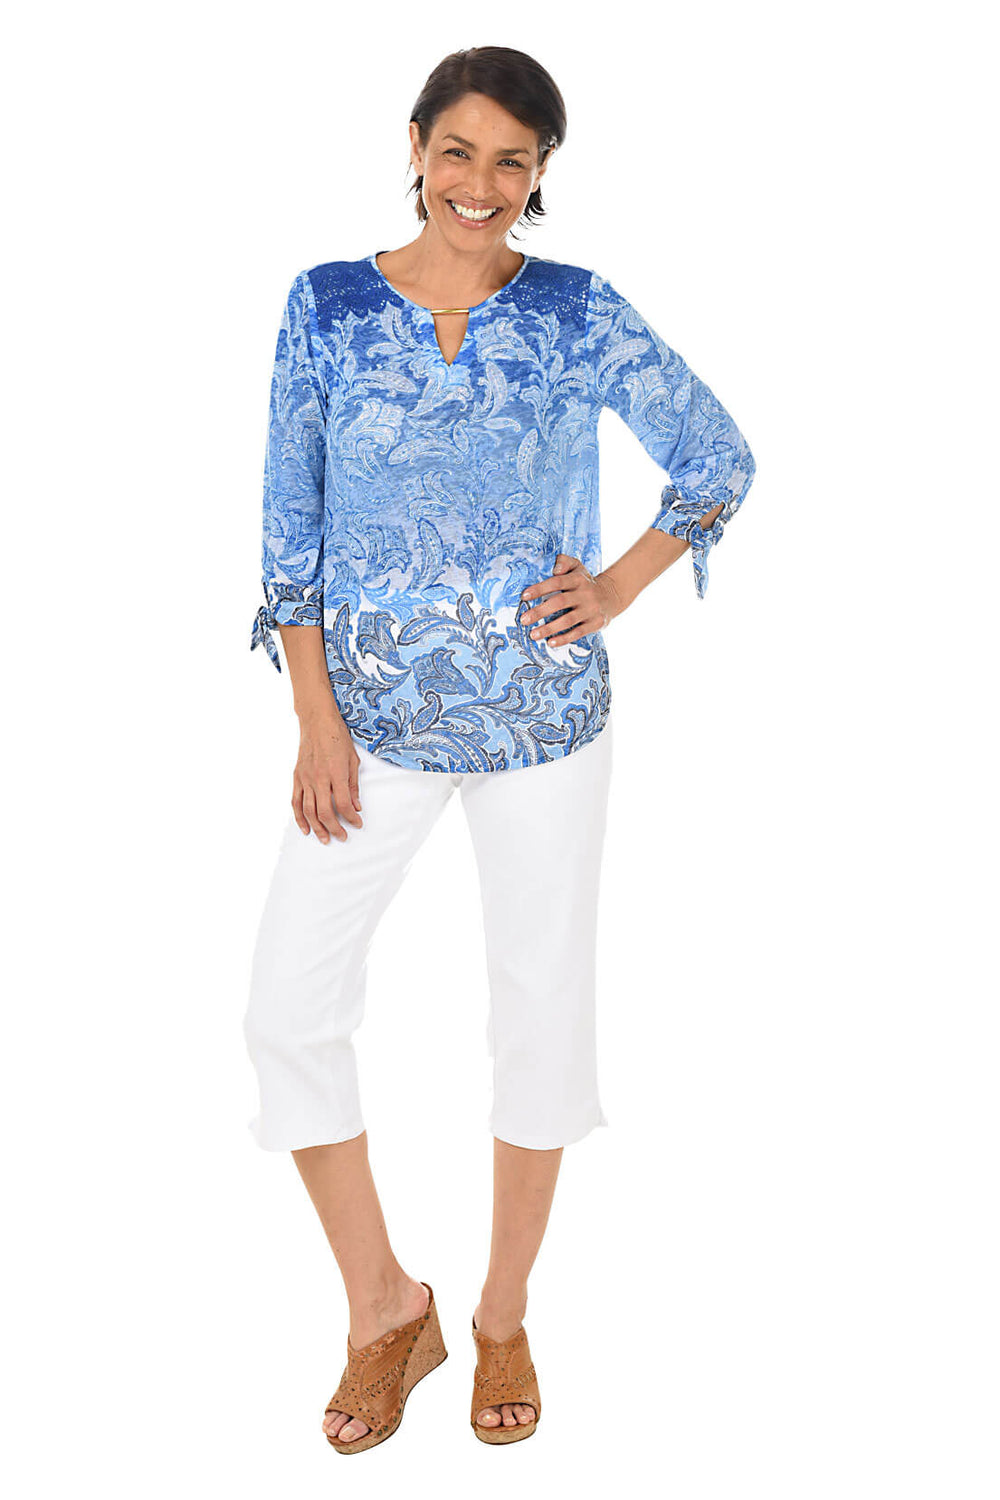 Ruby Road Women's Clothing | Coordinating Tops & Pants – Page 2